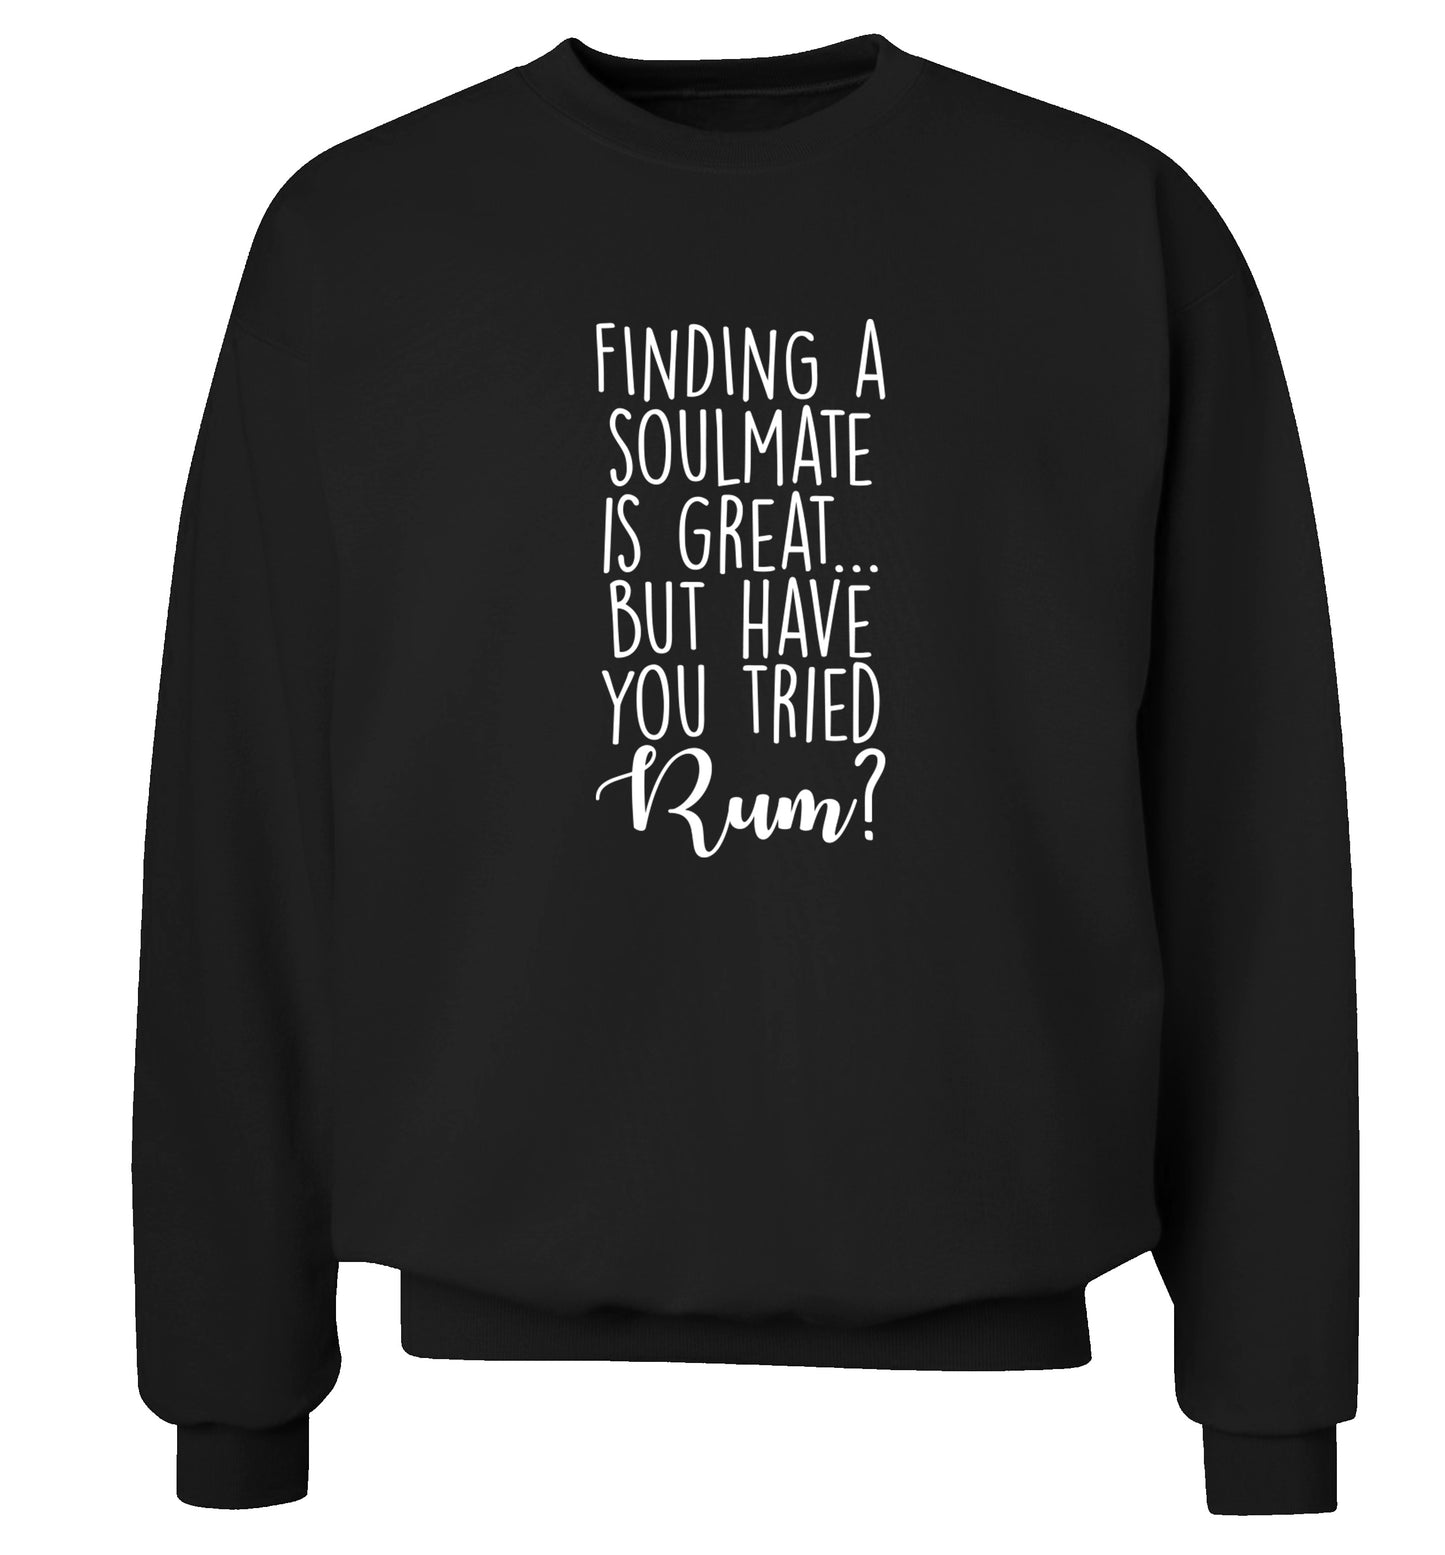 Finding a soulmate is great but have you tried rum? Adult's unisex black Sweater 2XL